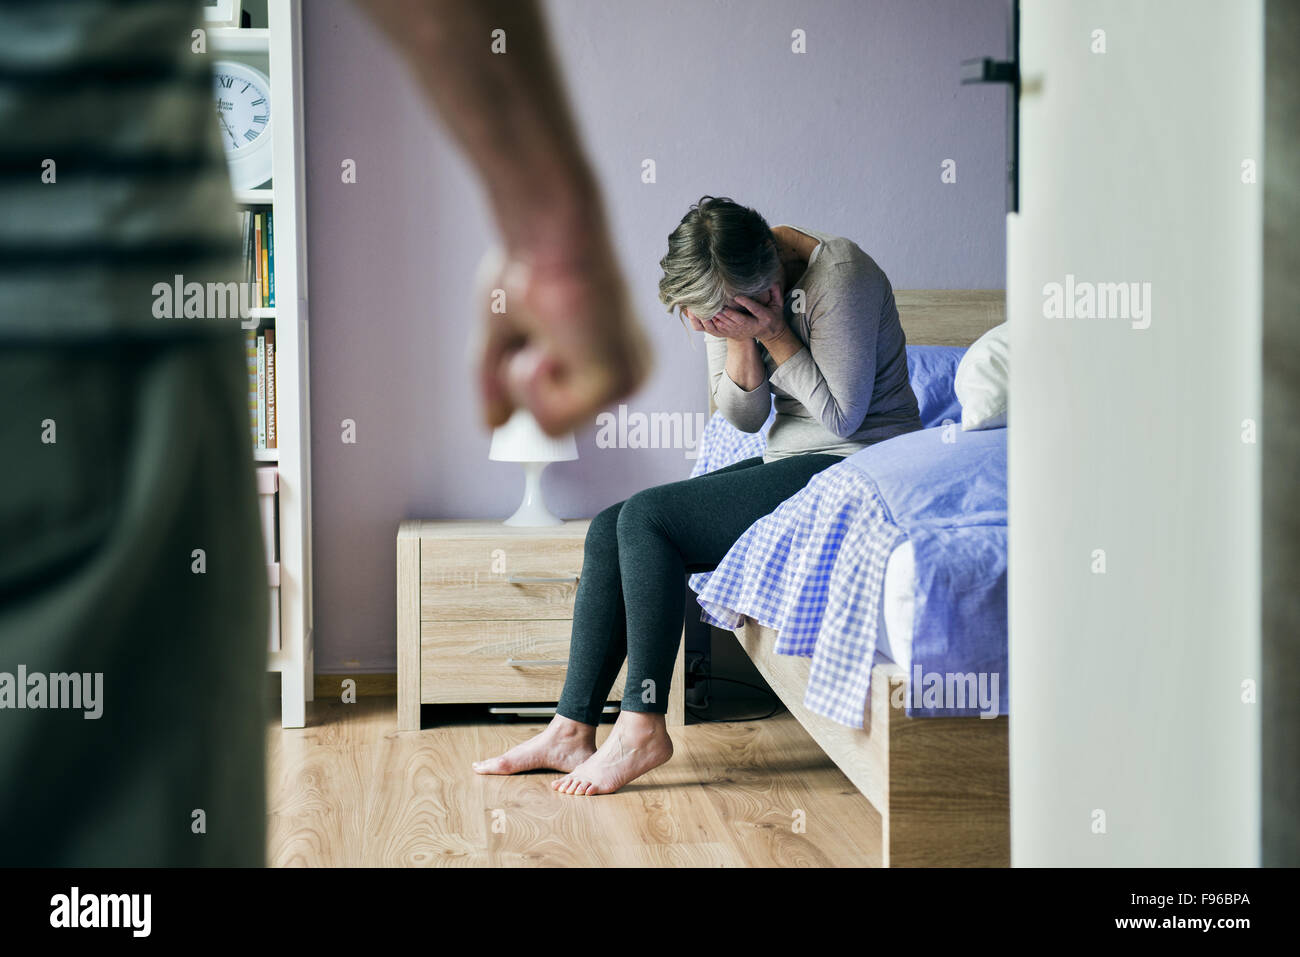 Mature woman sitting on the bed is scared of a man. Woman is victim of domestic violence and abuse. Stock Photo